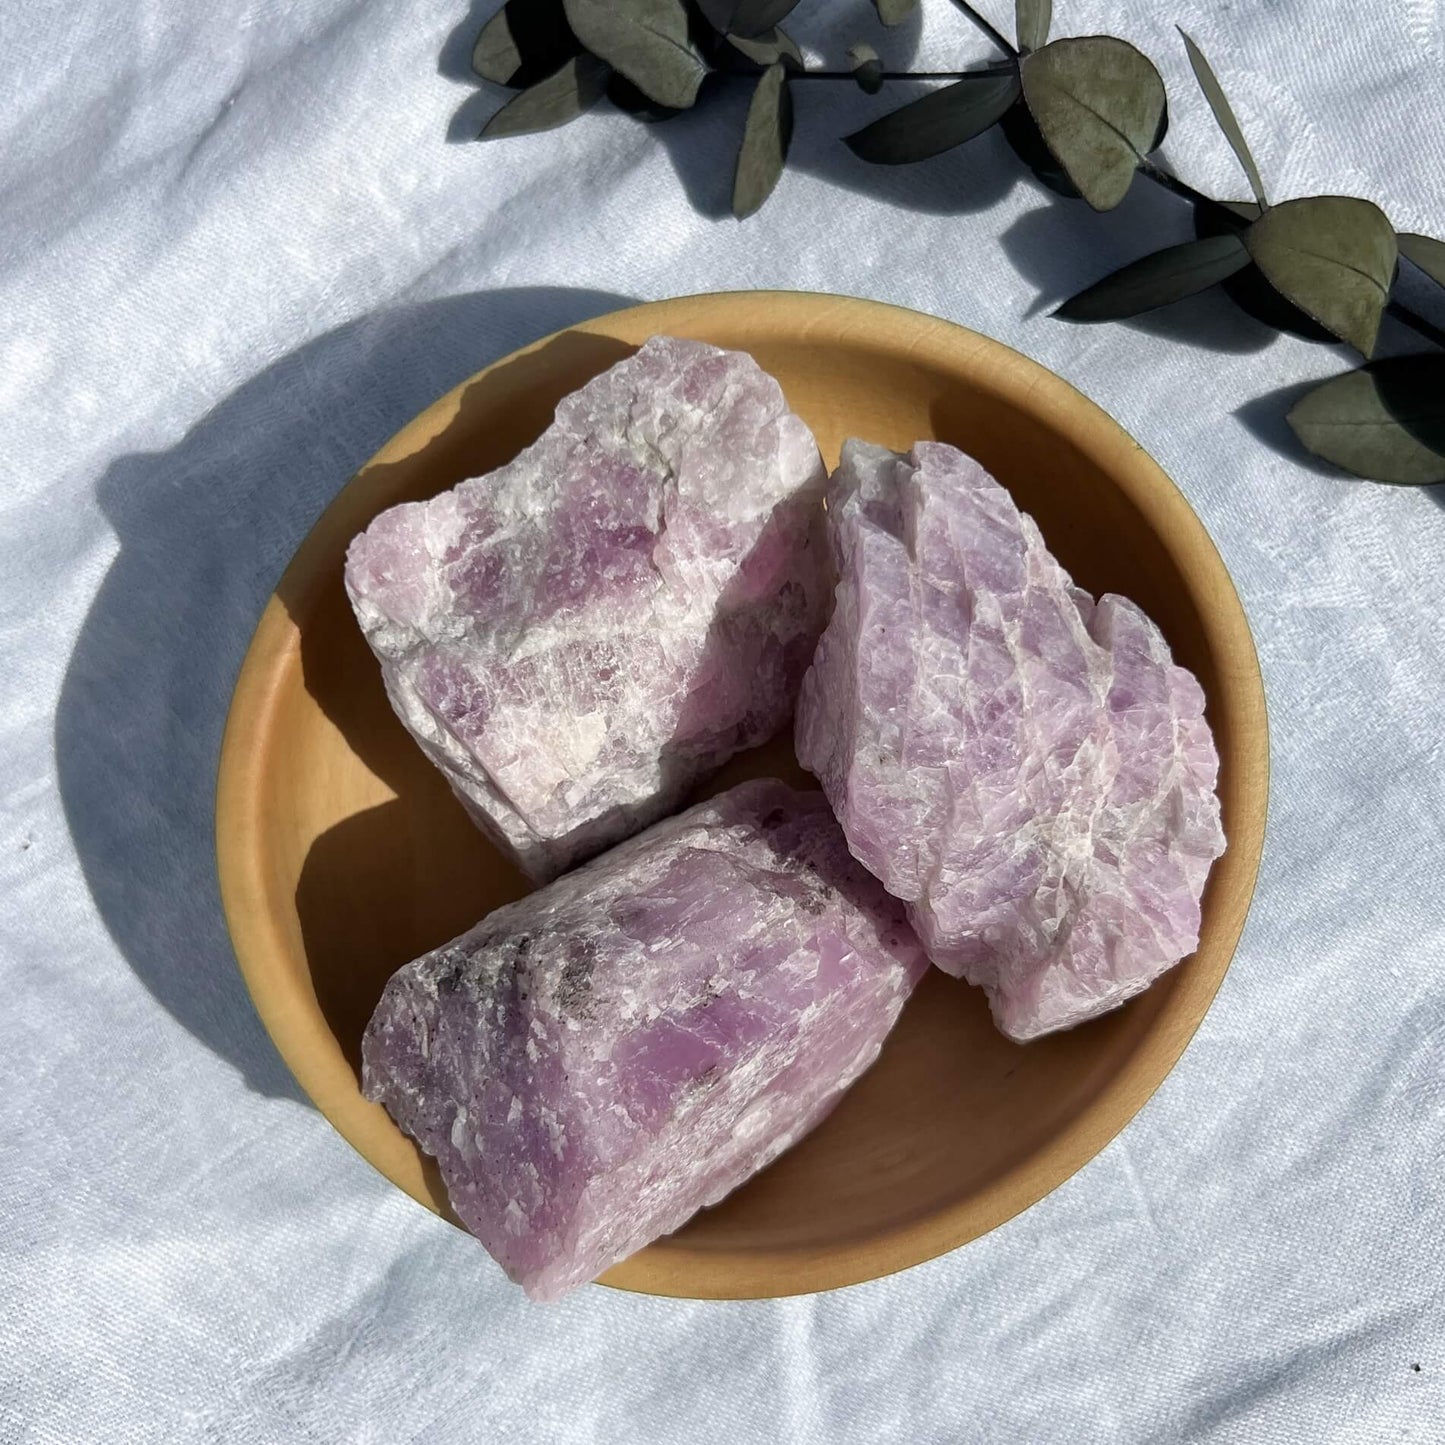 extra large lilac coloured raw kunzite crystal pieces in a wooden dish